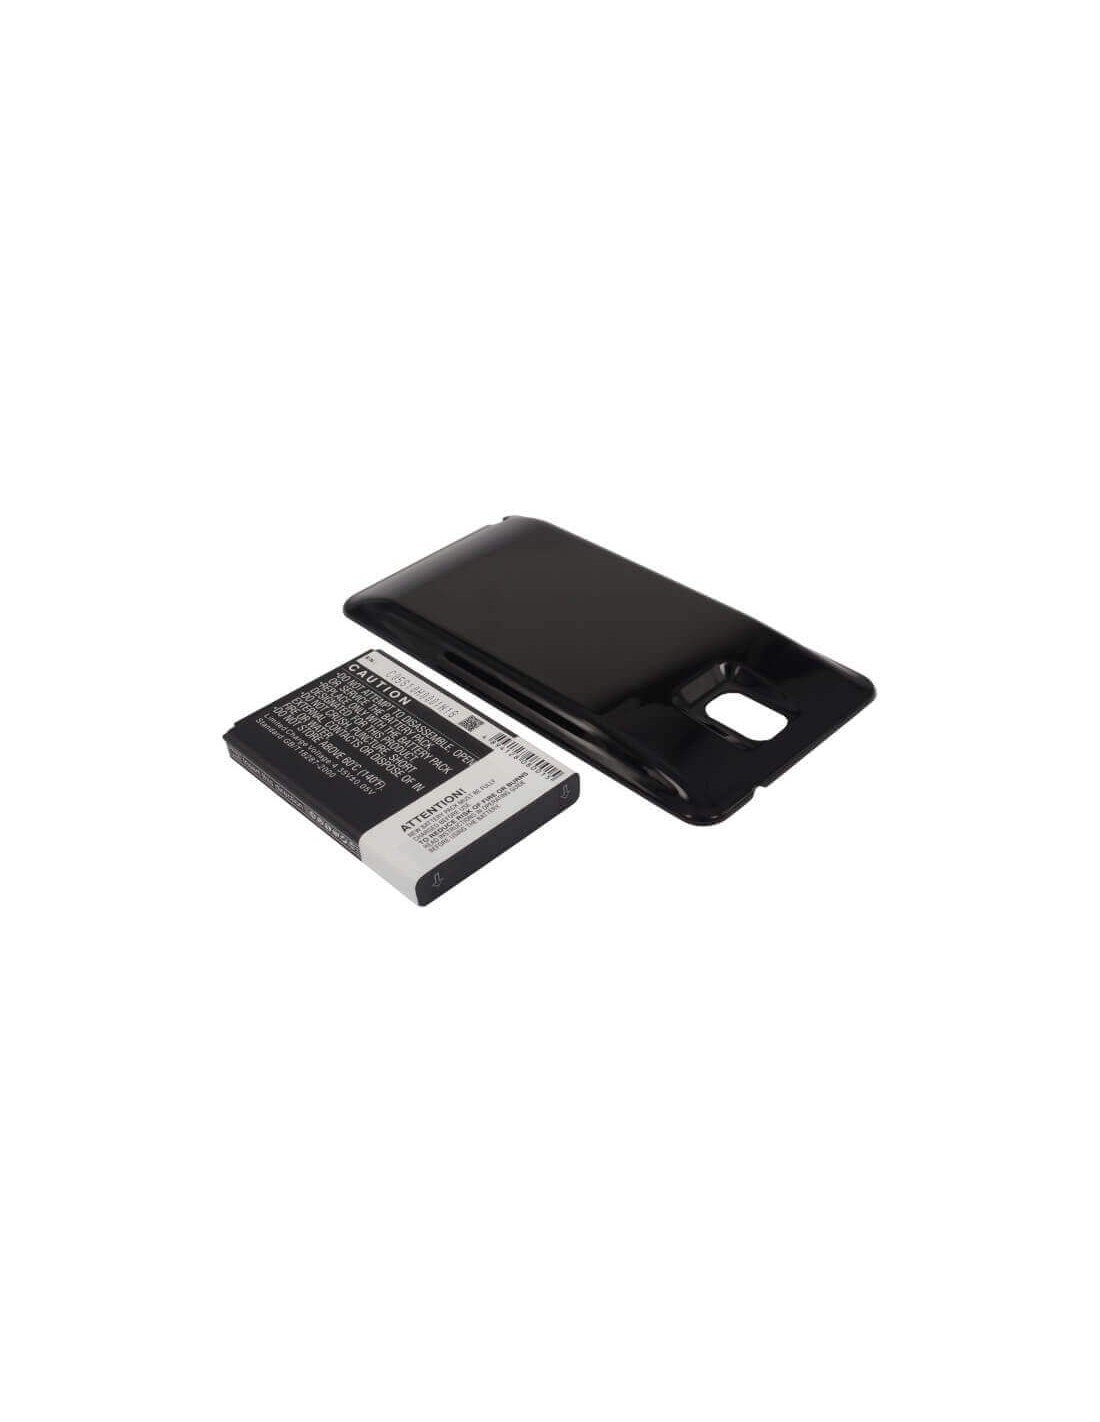 Battery for Samsung SM-N900, SM-N9005, Galaxy Note 3, black cover 3.8V, 6400mAh - 24.32Wh